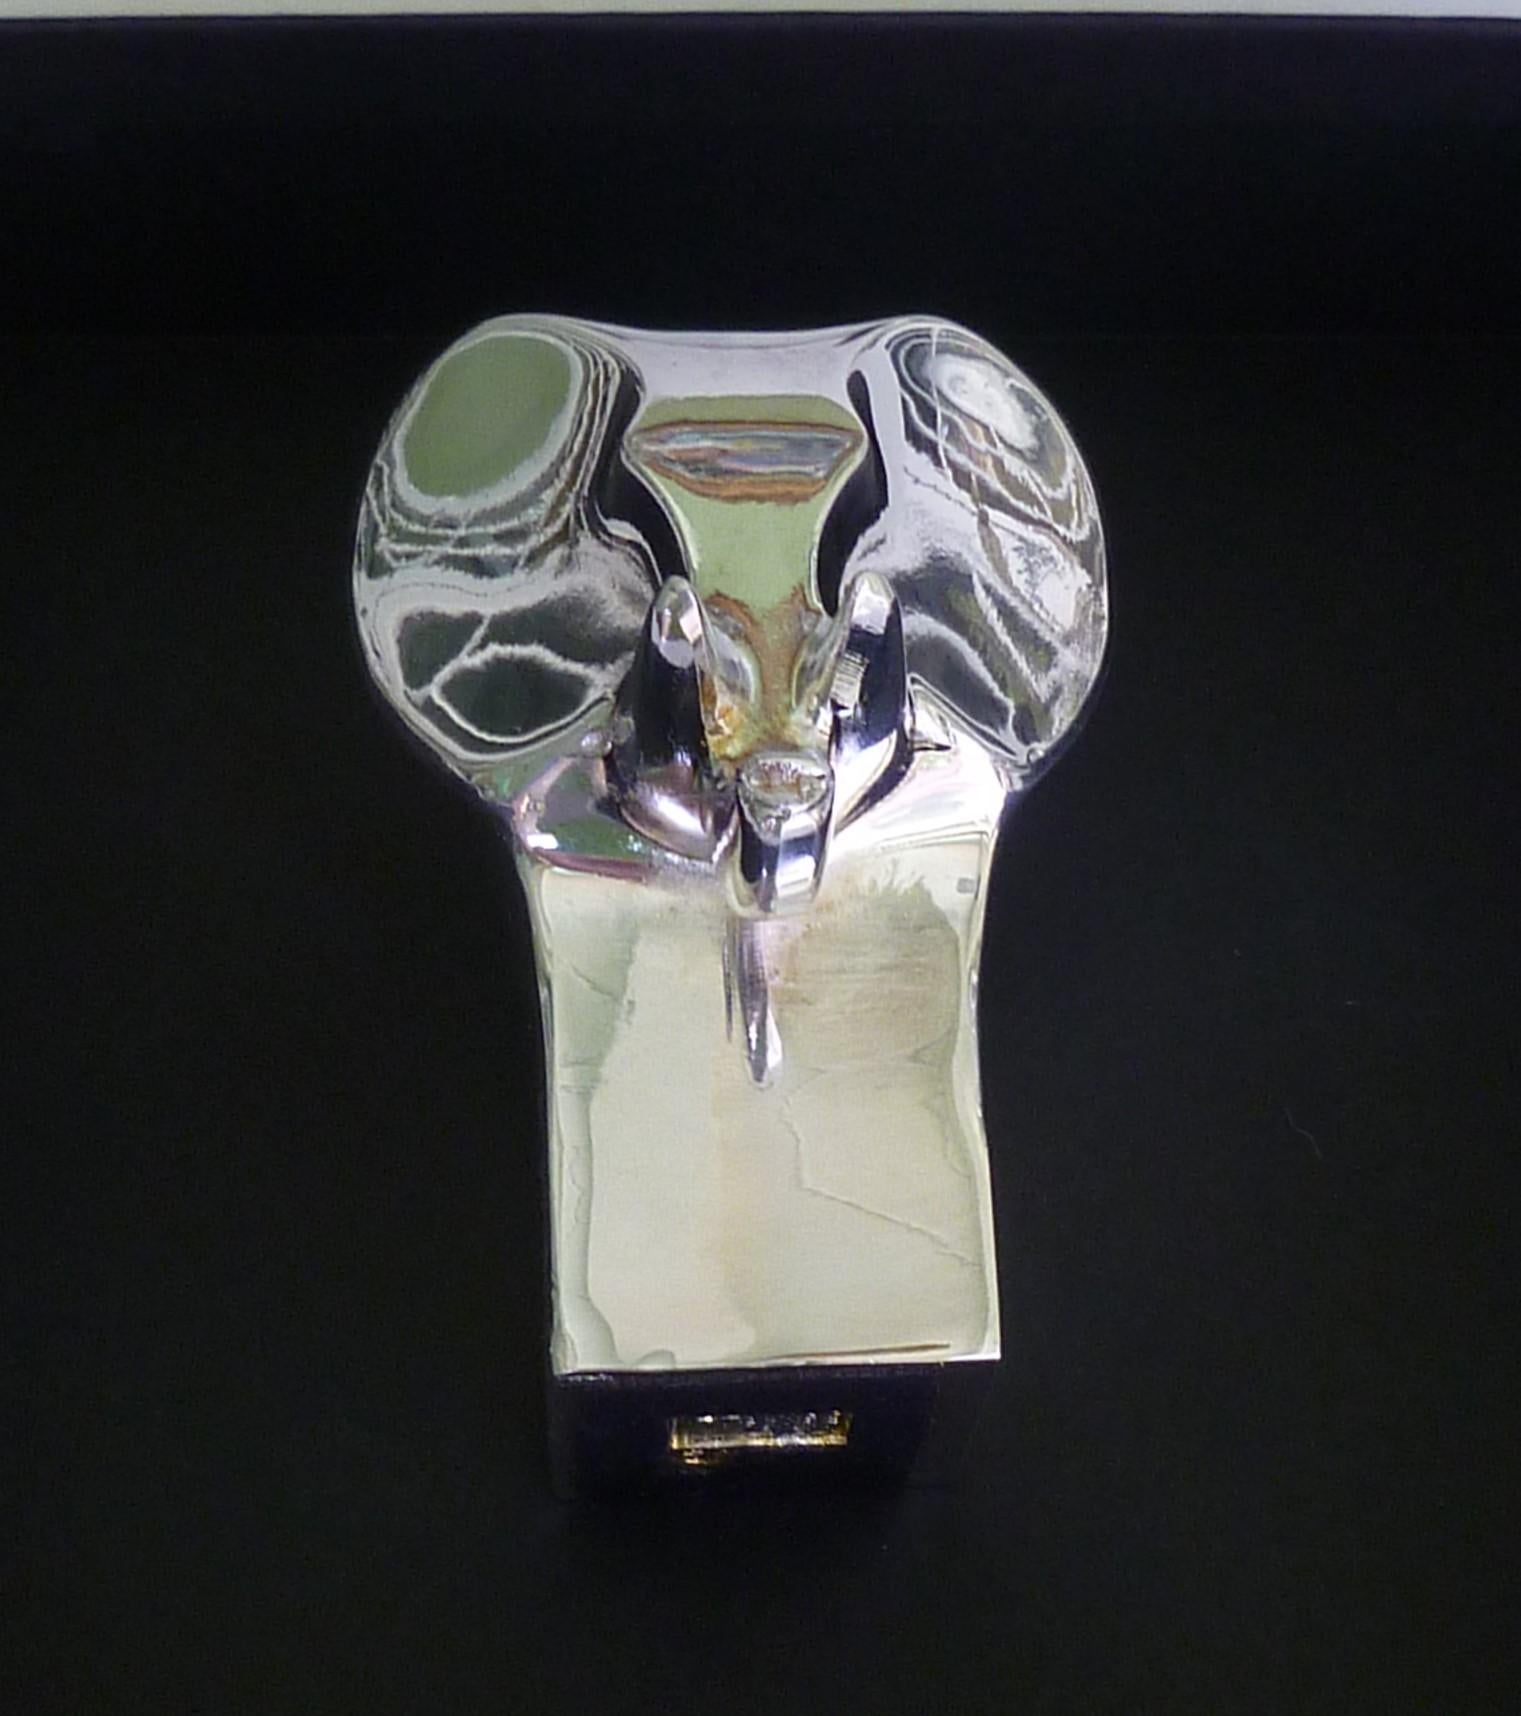 Japanese Dansk Designs Grouping Silver Plated Animal Paperweights by Gunnar Cyren, 1970s